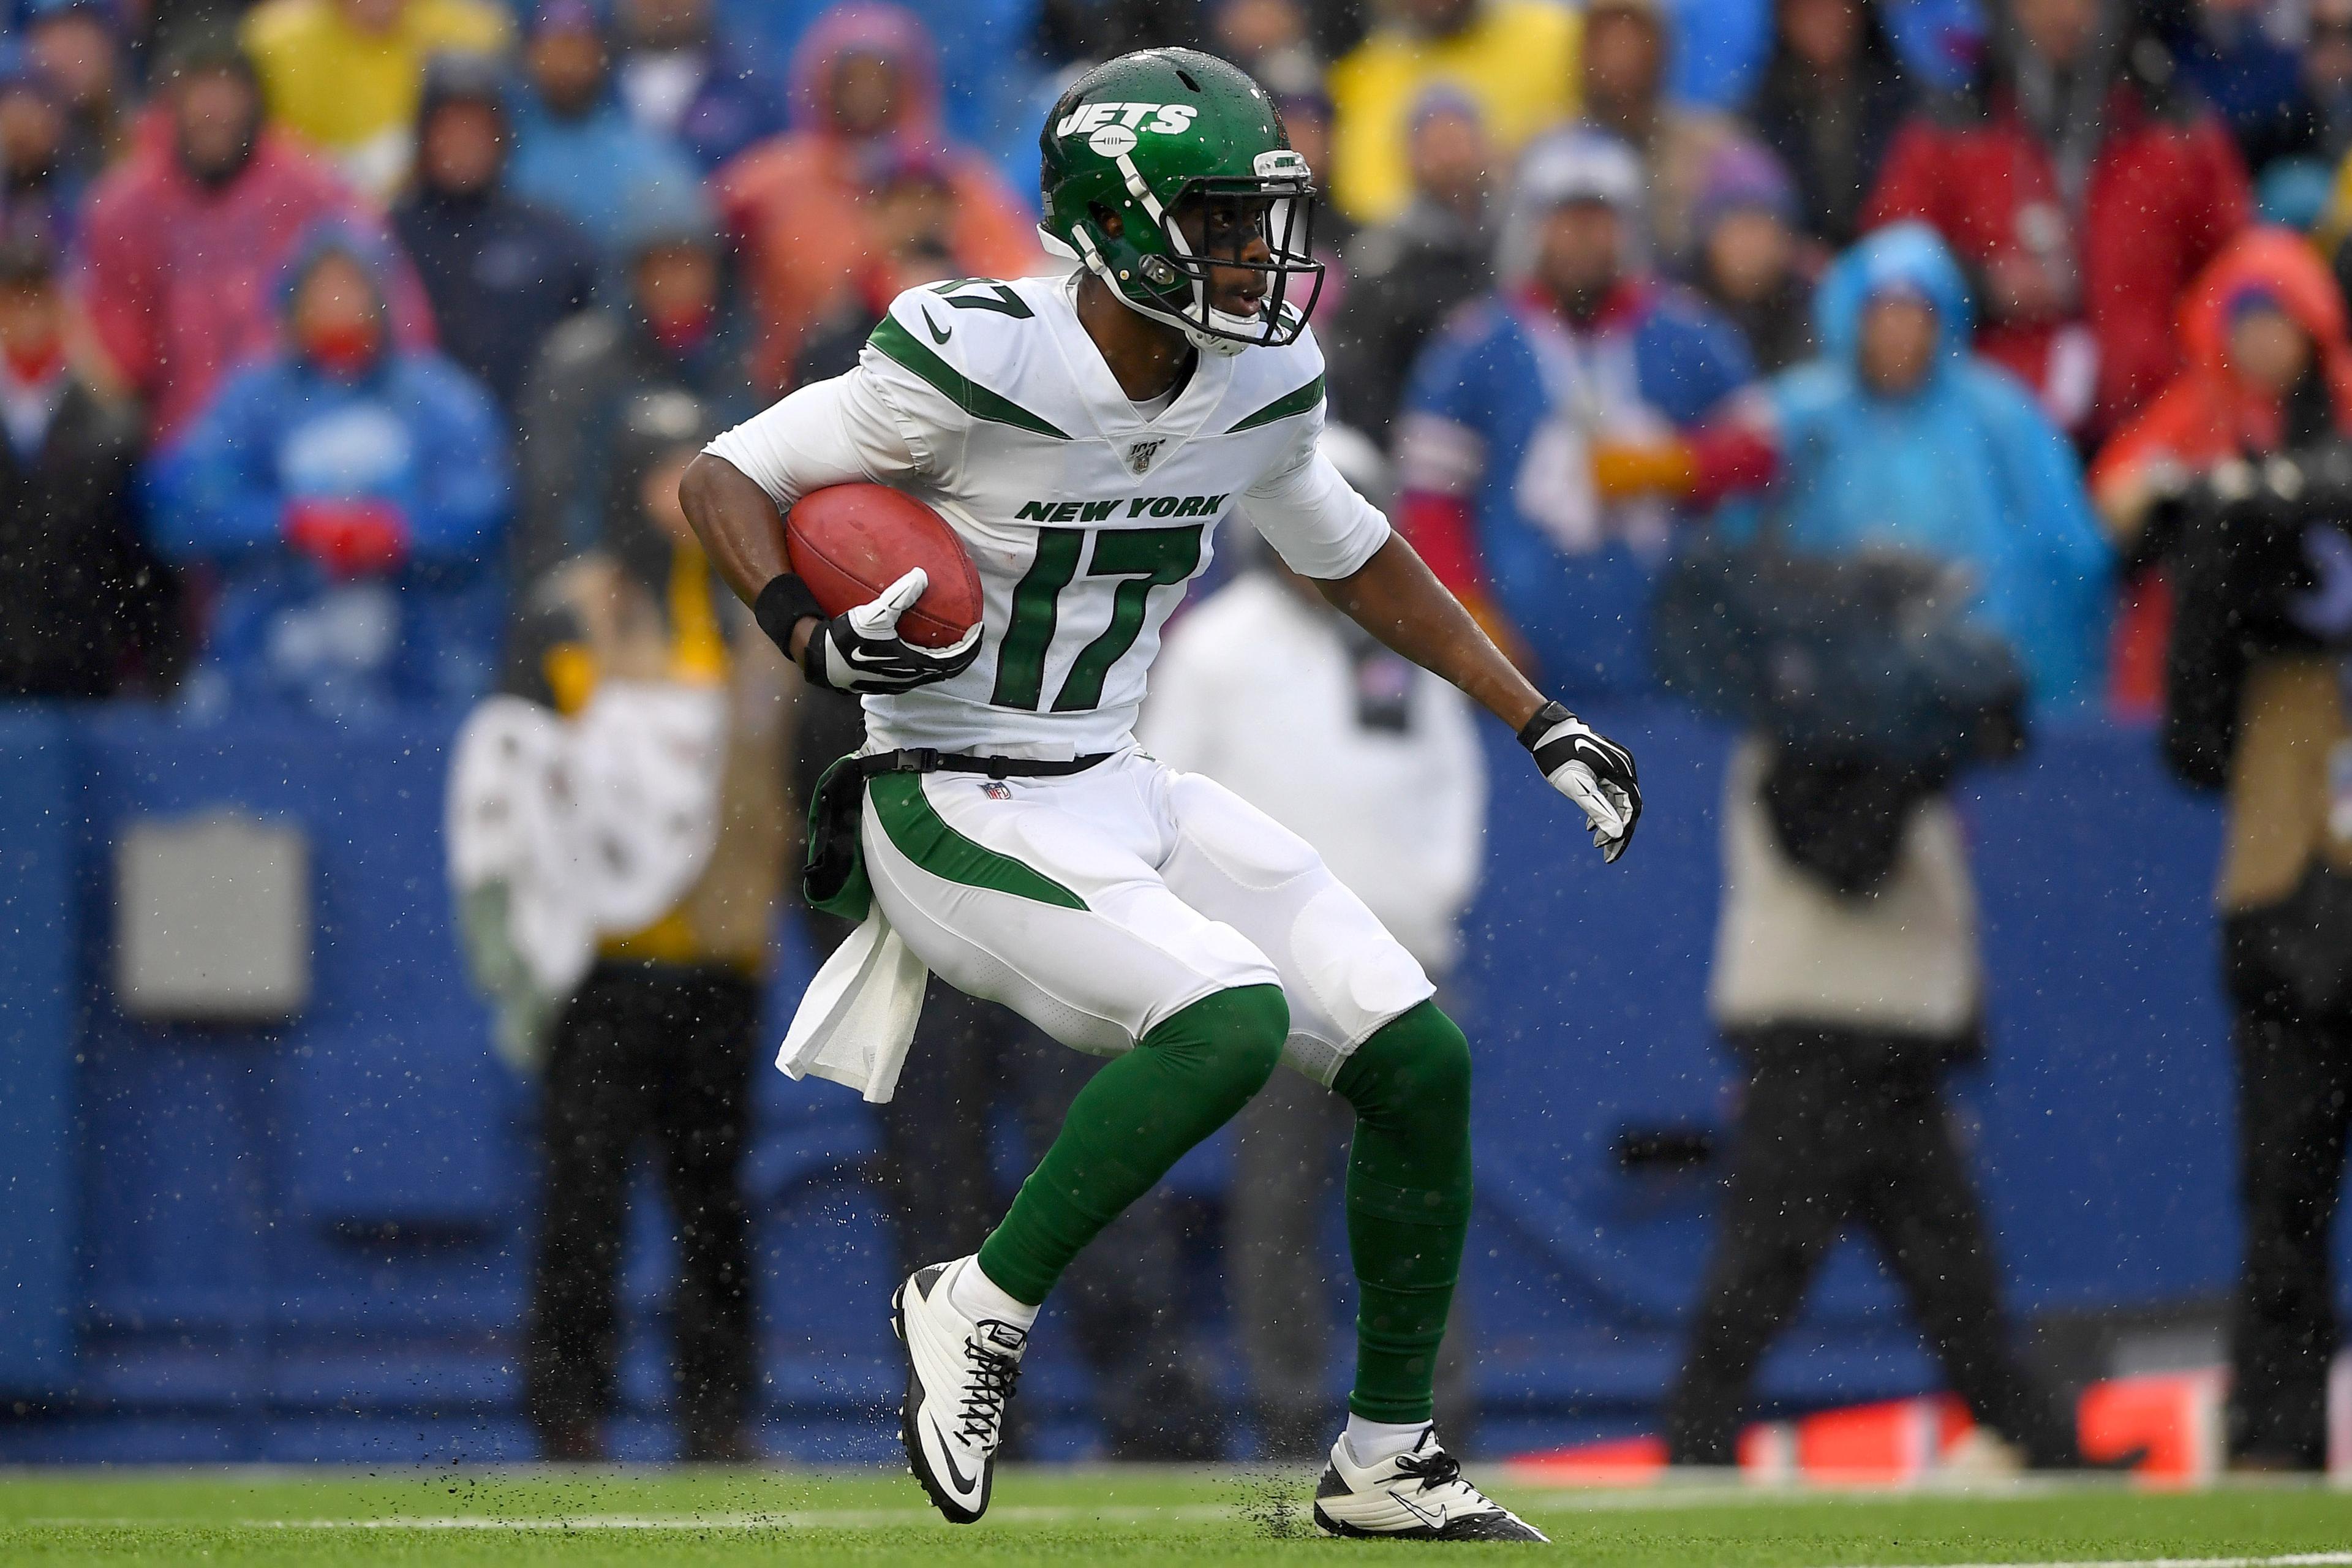 Dec 29, 2019; Orchard Park, New York, USA; New York Jets wide receiver Vyncint Smith (17) returns a kick-off against the Buffalo Bills during the first quarter at New Era Field. Mandatory Credit: Rich Barnes-USA TODAY Sports / Rich Barnes-USA TODAY Sports